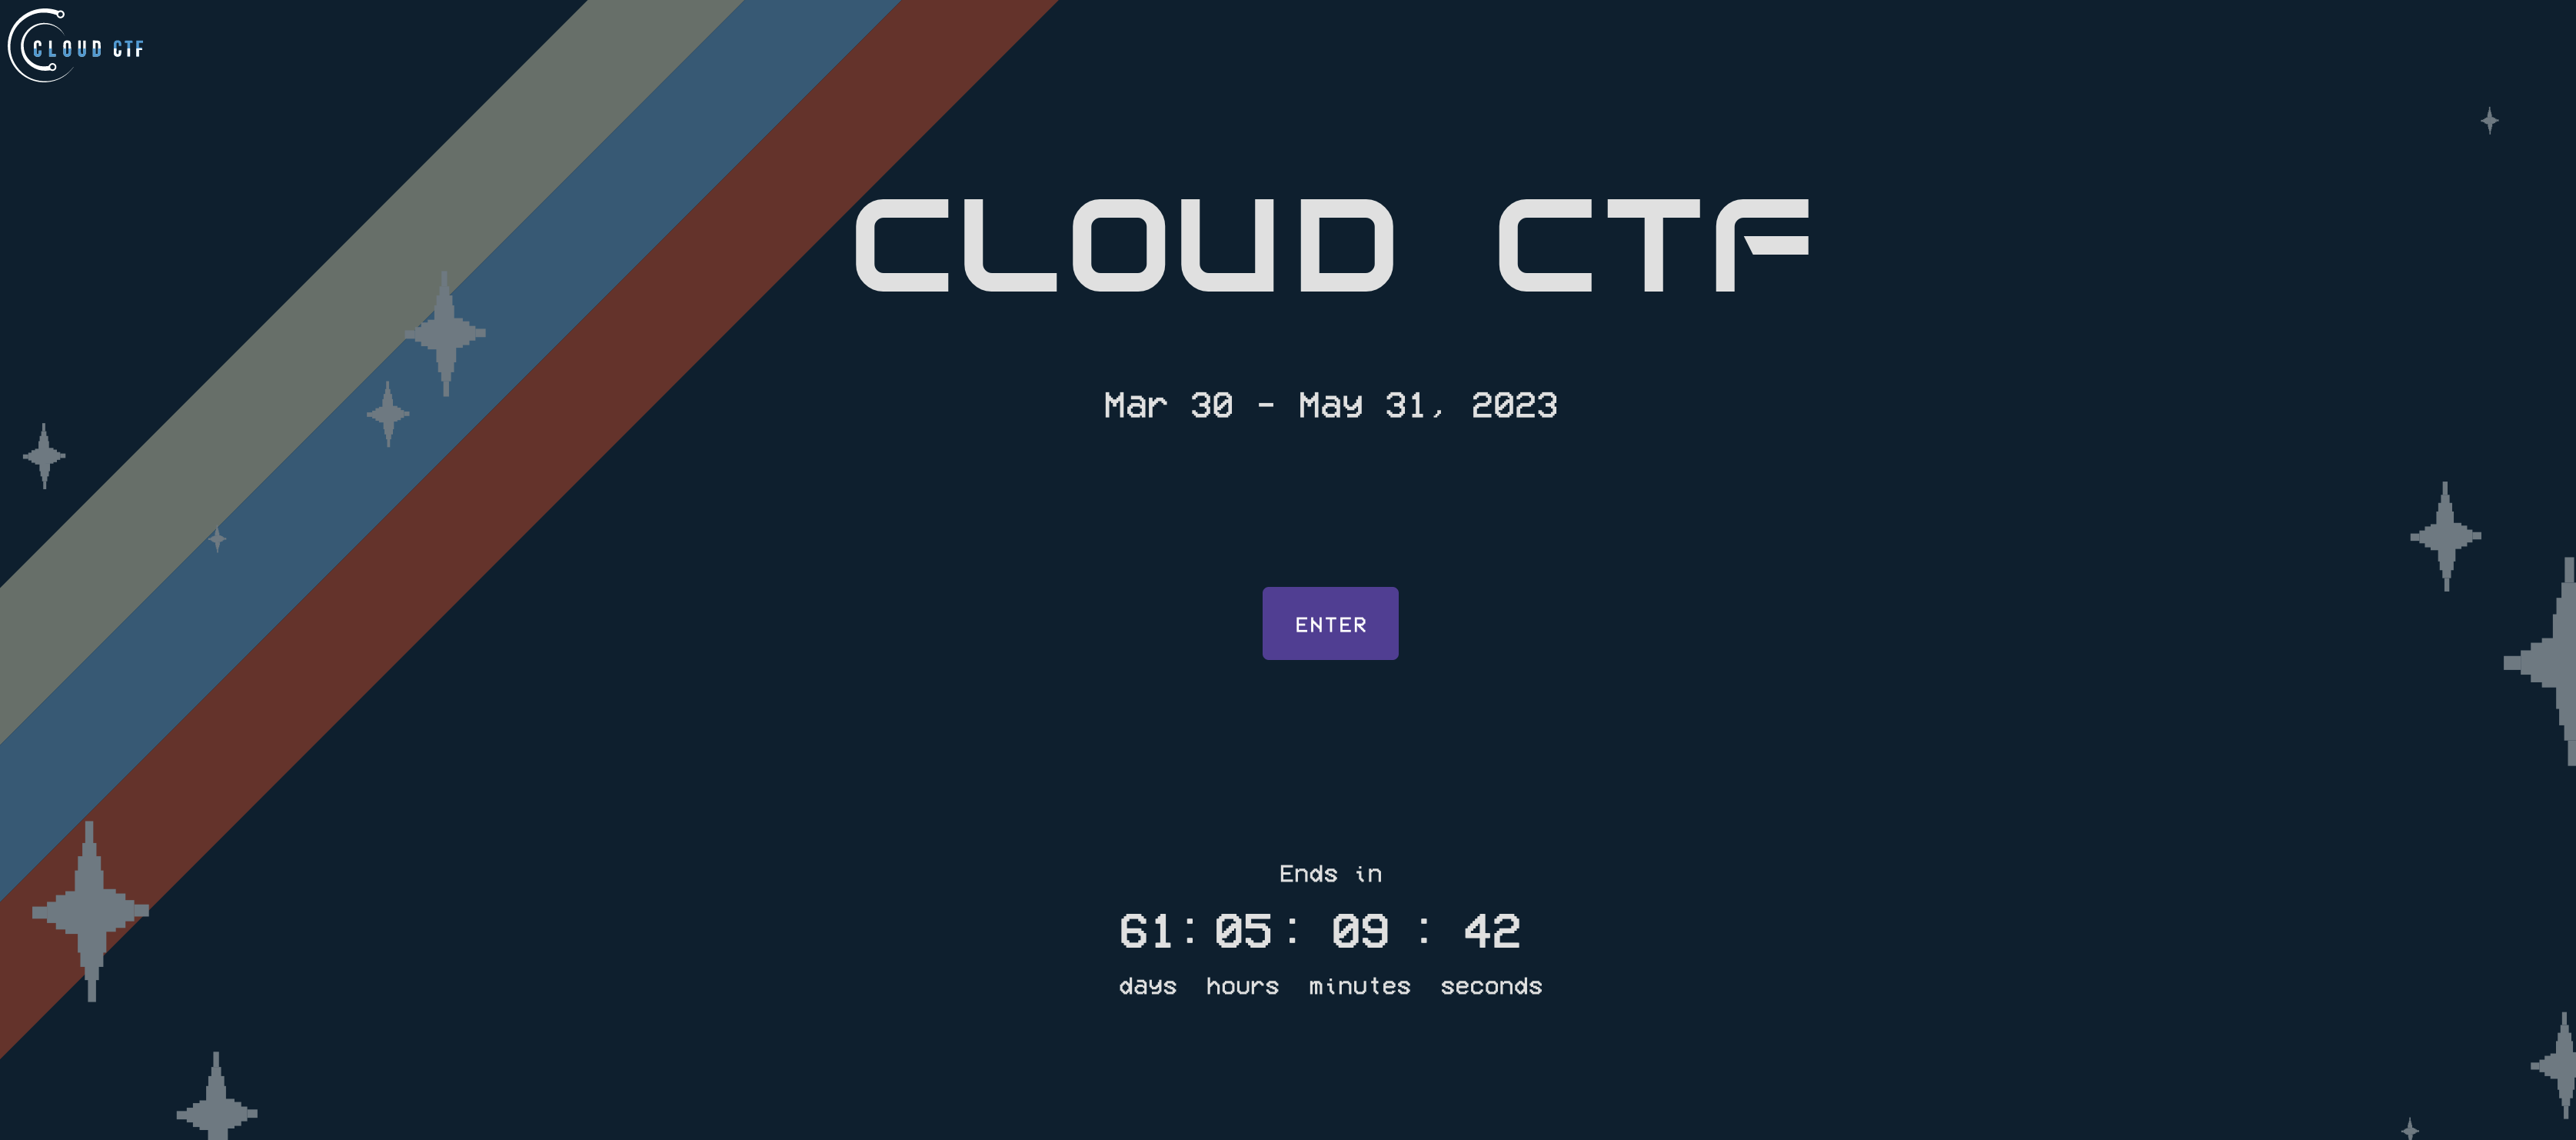 The CloudCTF enviroment start screen is shown, in a new tab.